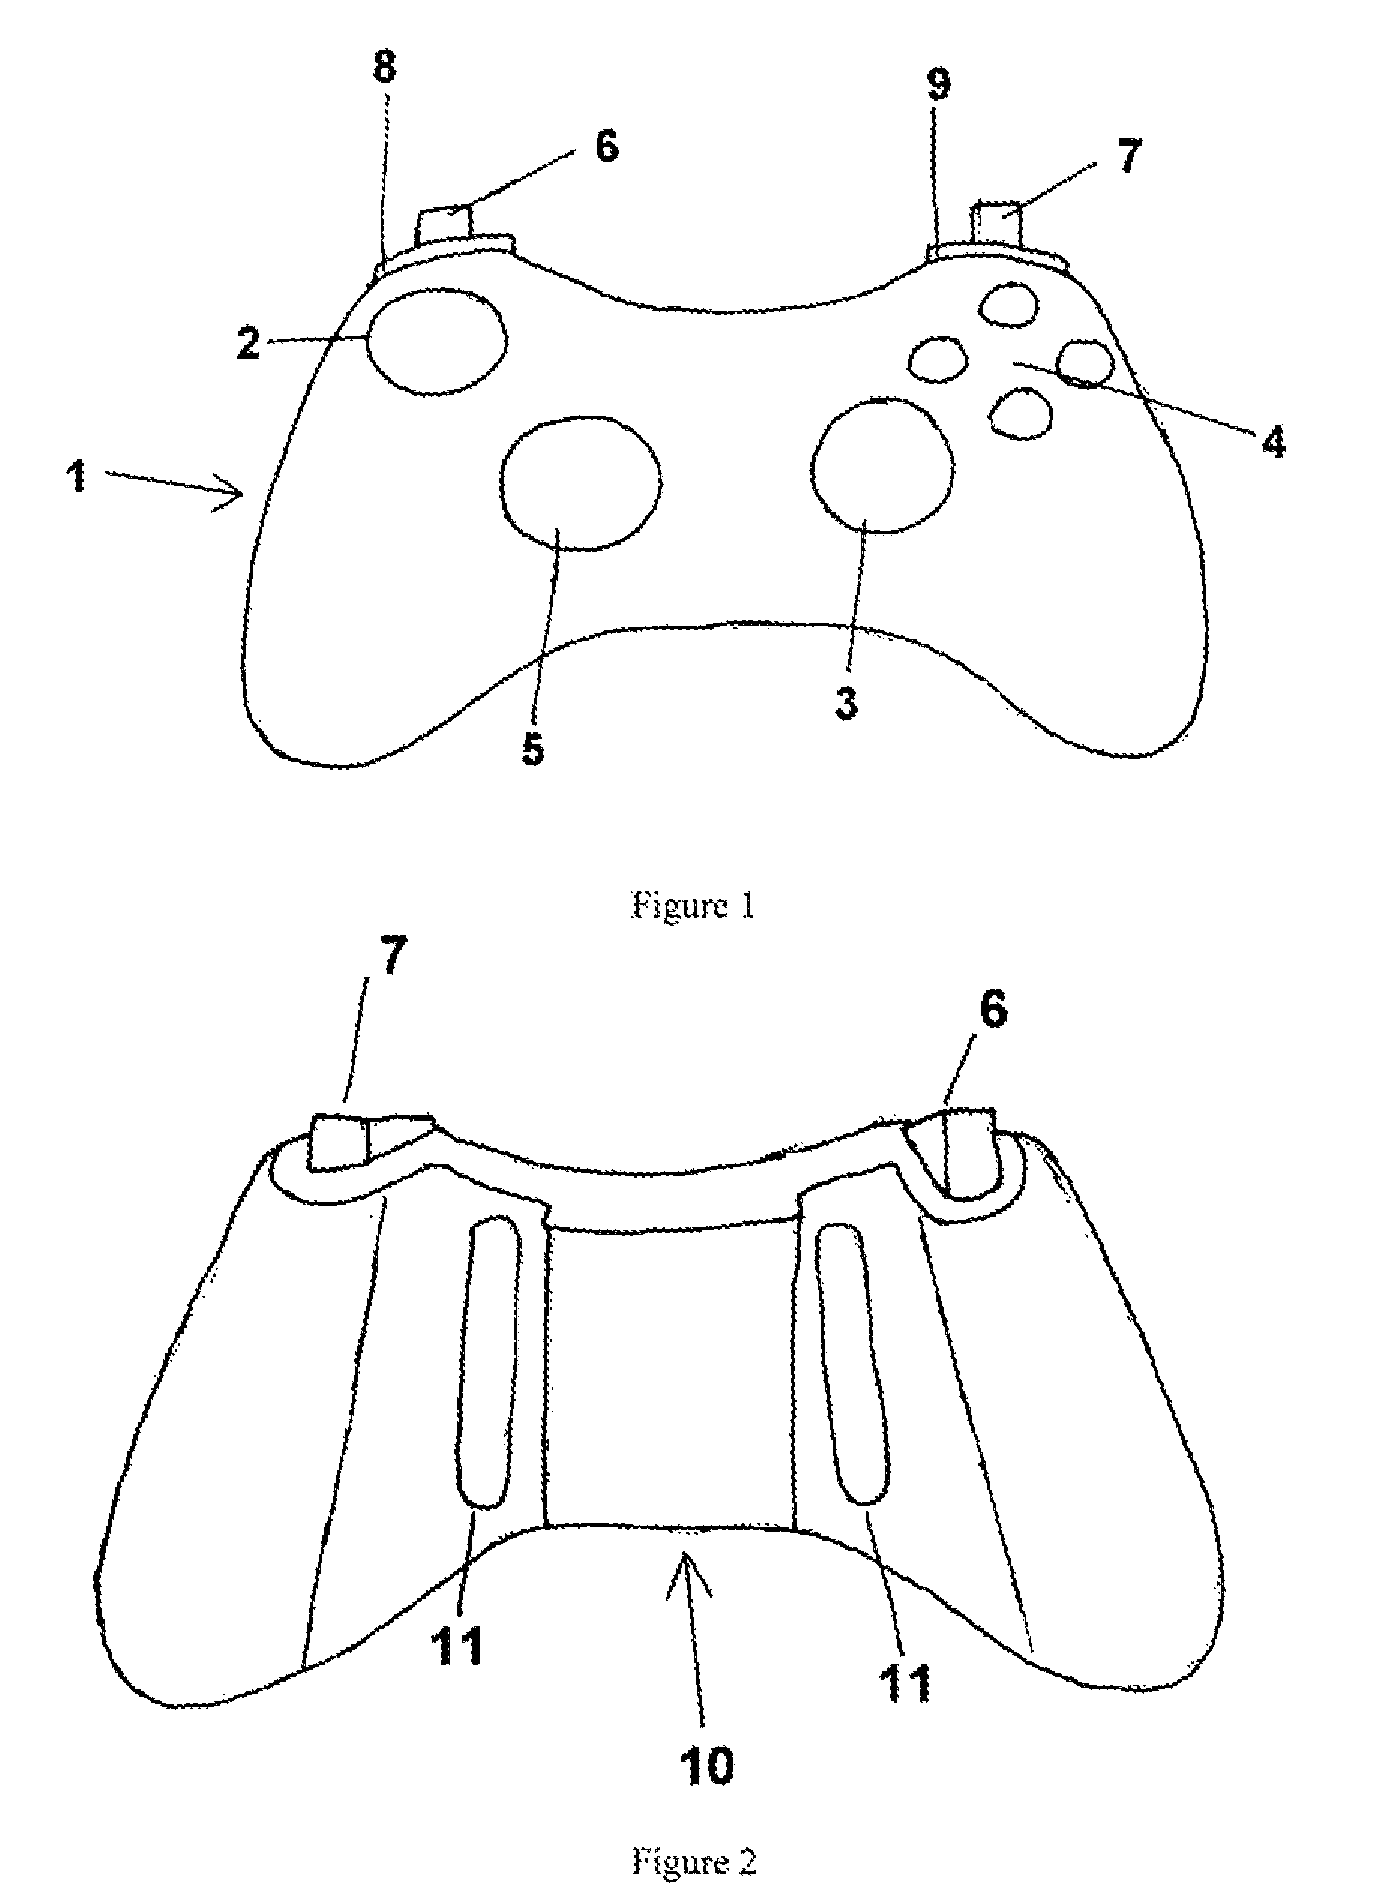 Controller for video game console